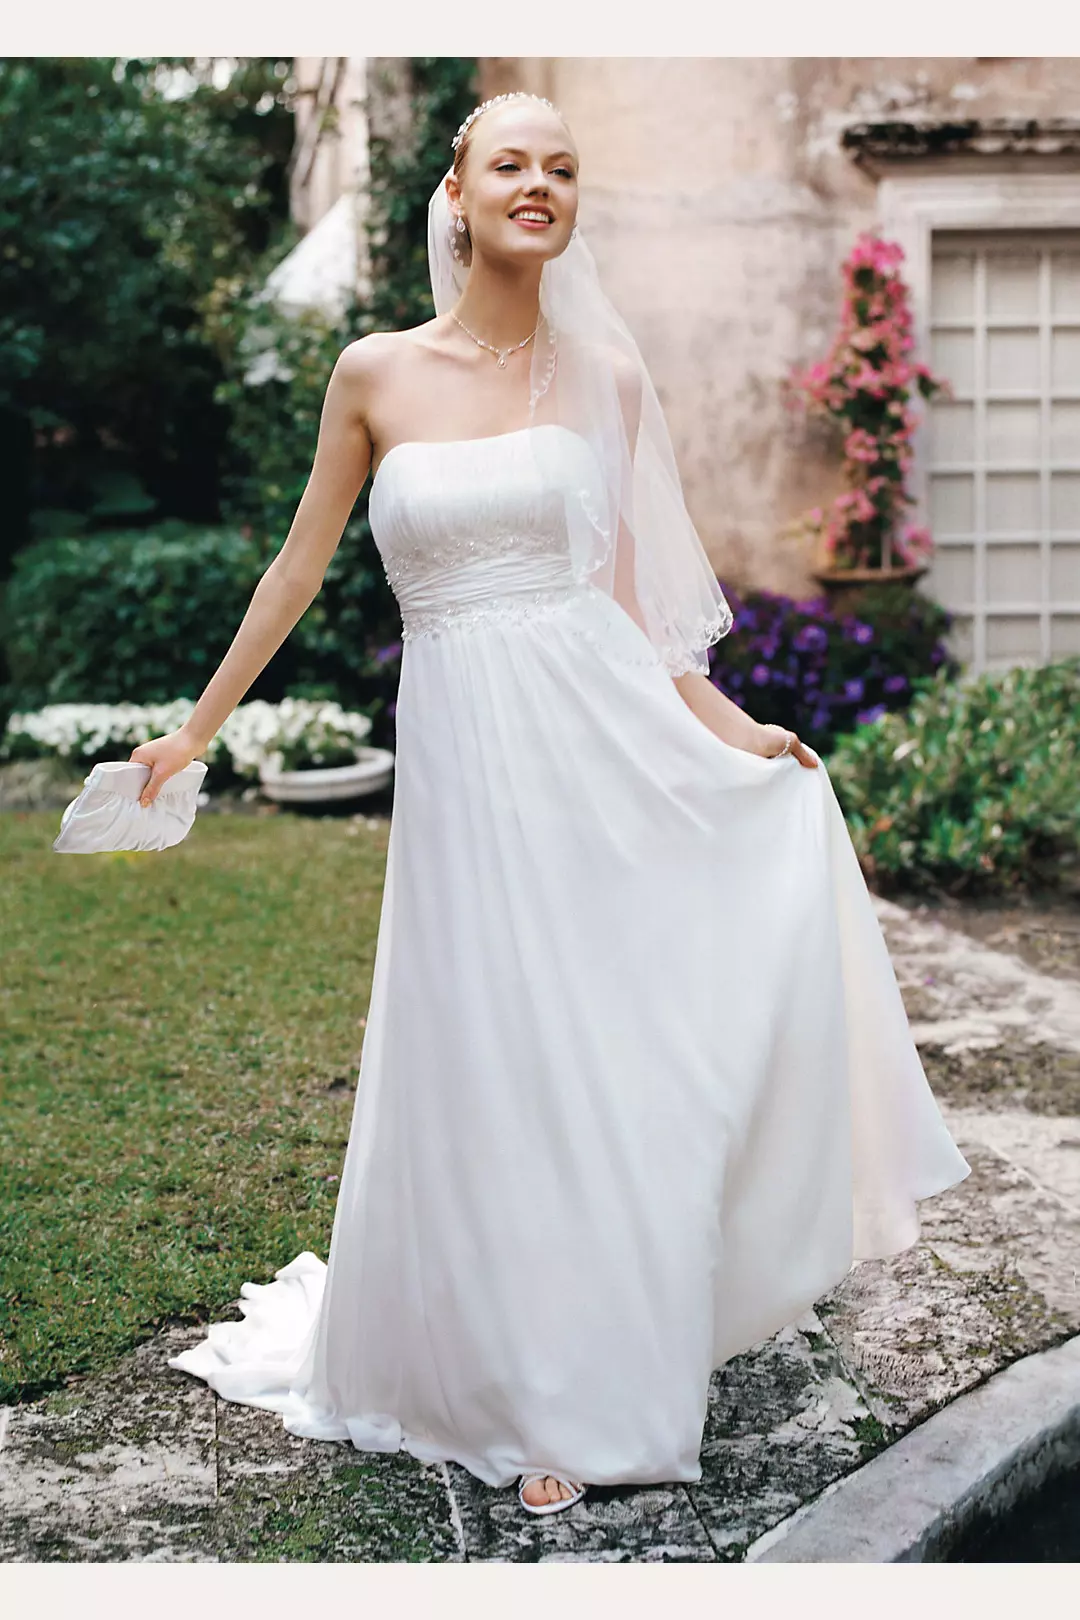 Chiffon Soft Gown with Beaded Lace on Empire Waist | David's Bridal